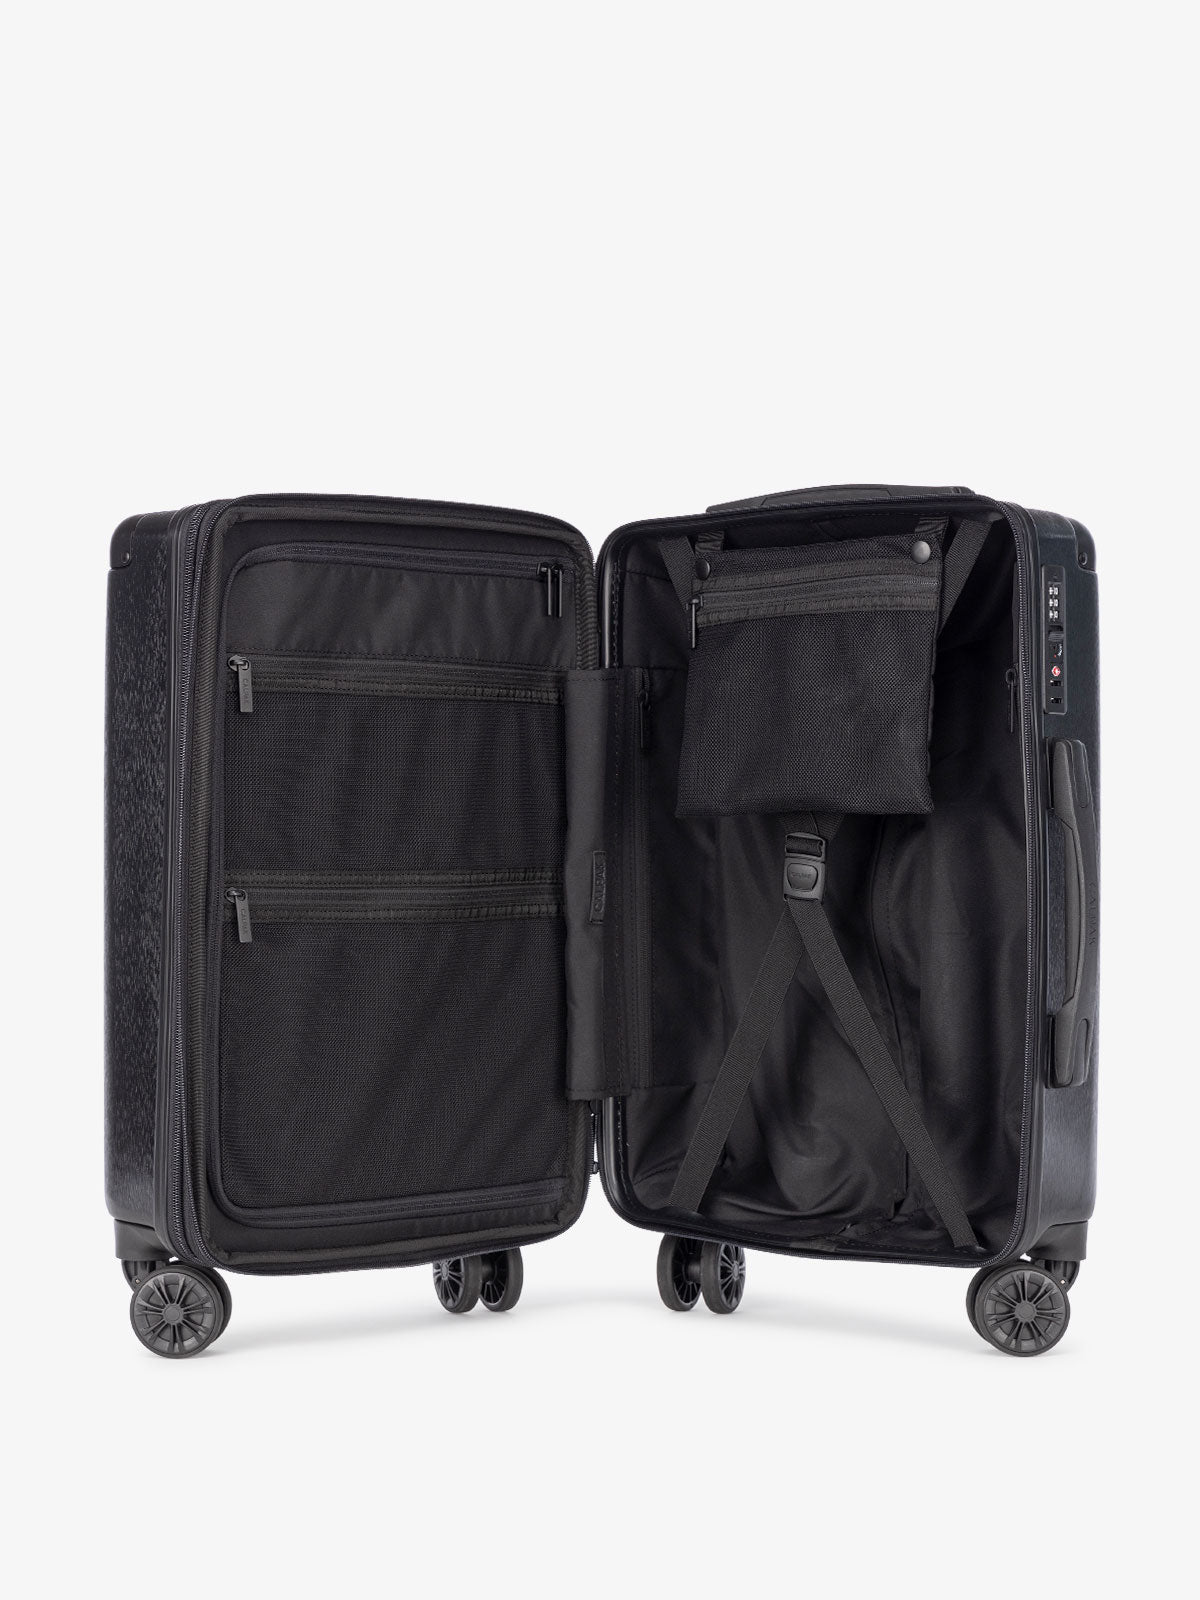 CALPAK Ambeur: 2 piece luggage set hard shell carry on suitcase with compression straps